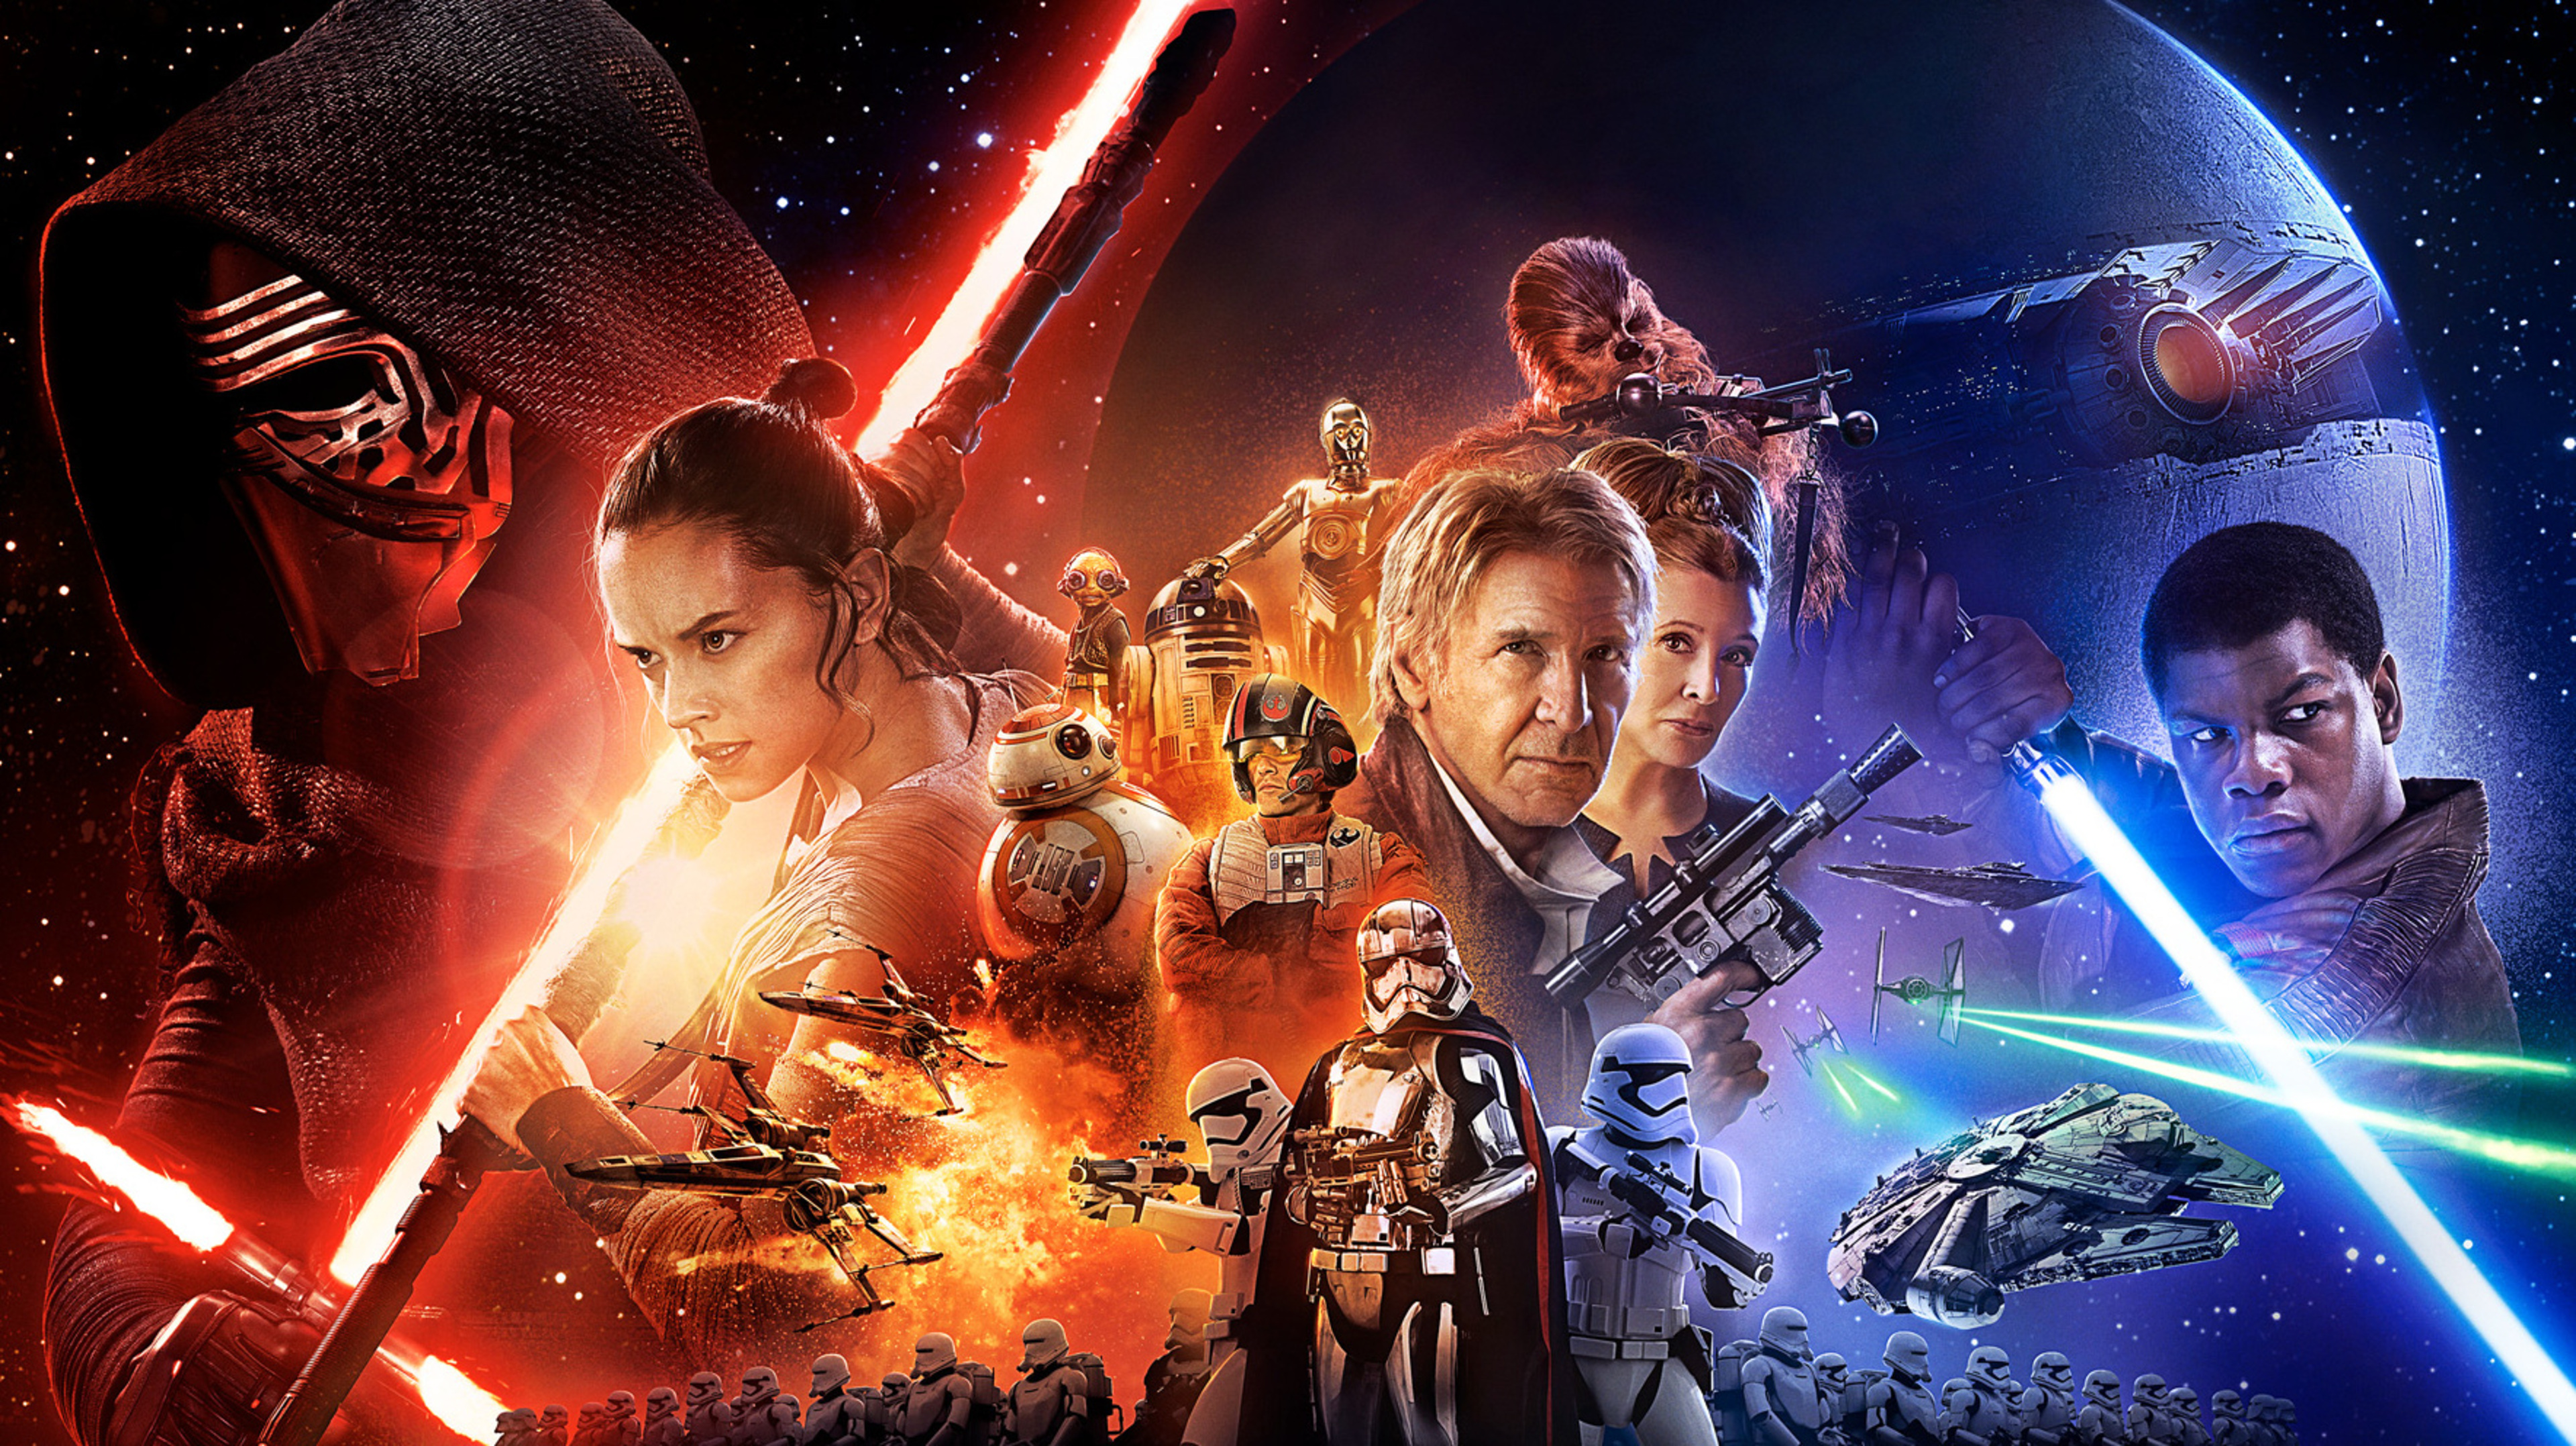 Star Wars - The Force Awakens Poster 1920 x 1080 wallpapers